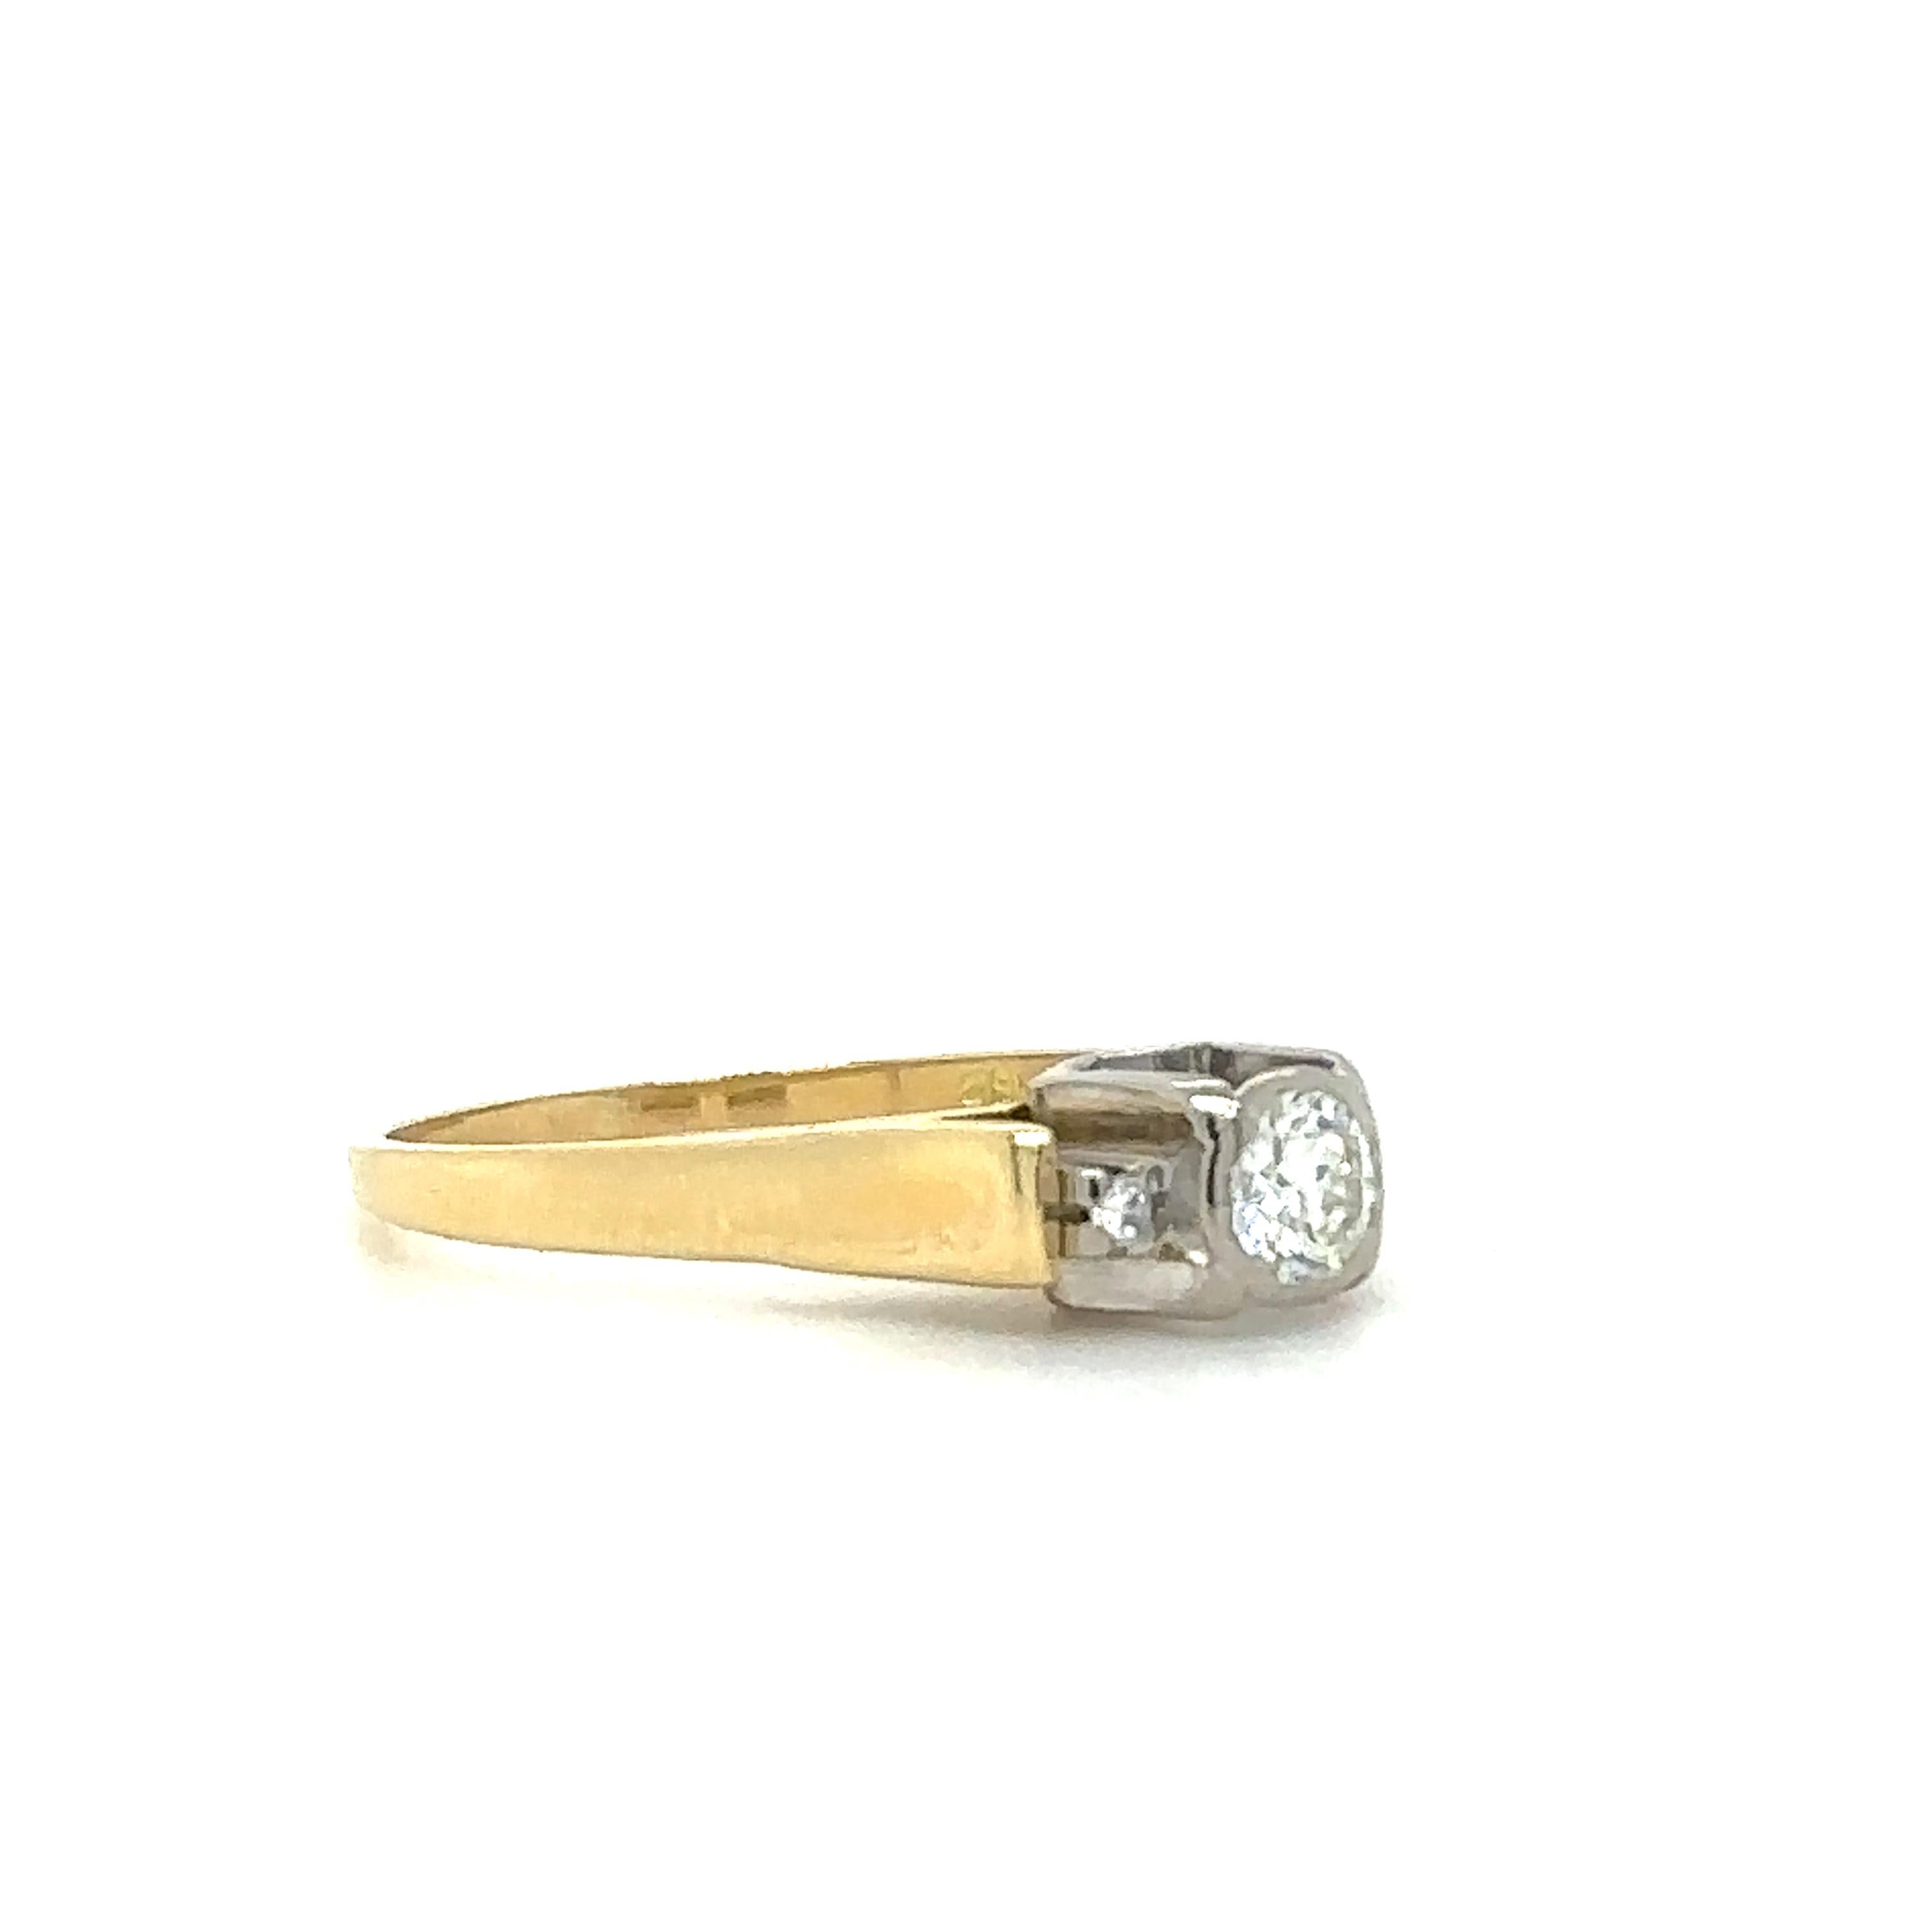 Unique features:

Diamond ring. Made of 18ct Yellow Gold, and weighing 4.4 gm. Stamped: 18C. Set with a Round, brilliant cut Diamond, colour G, and clarity VS1. Weighing 0.40 ct.

2 round, brilliant cut Diamonds, colour G-H and clarity VS-SI. with a